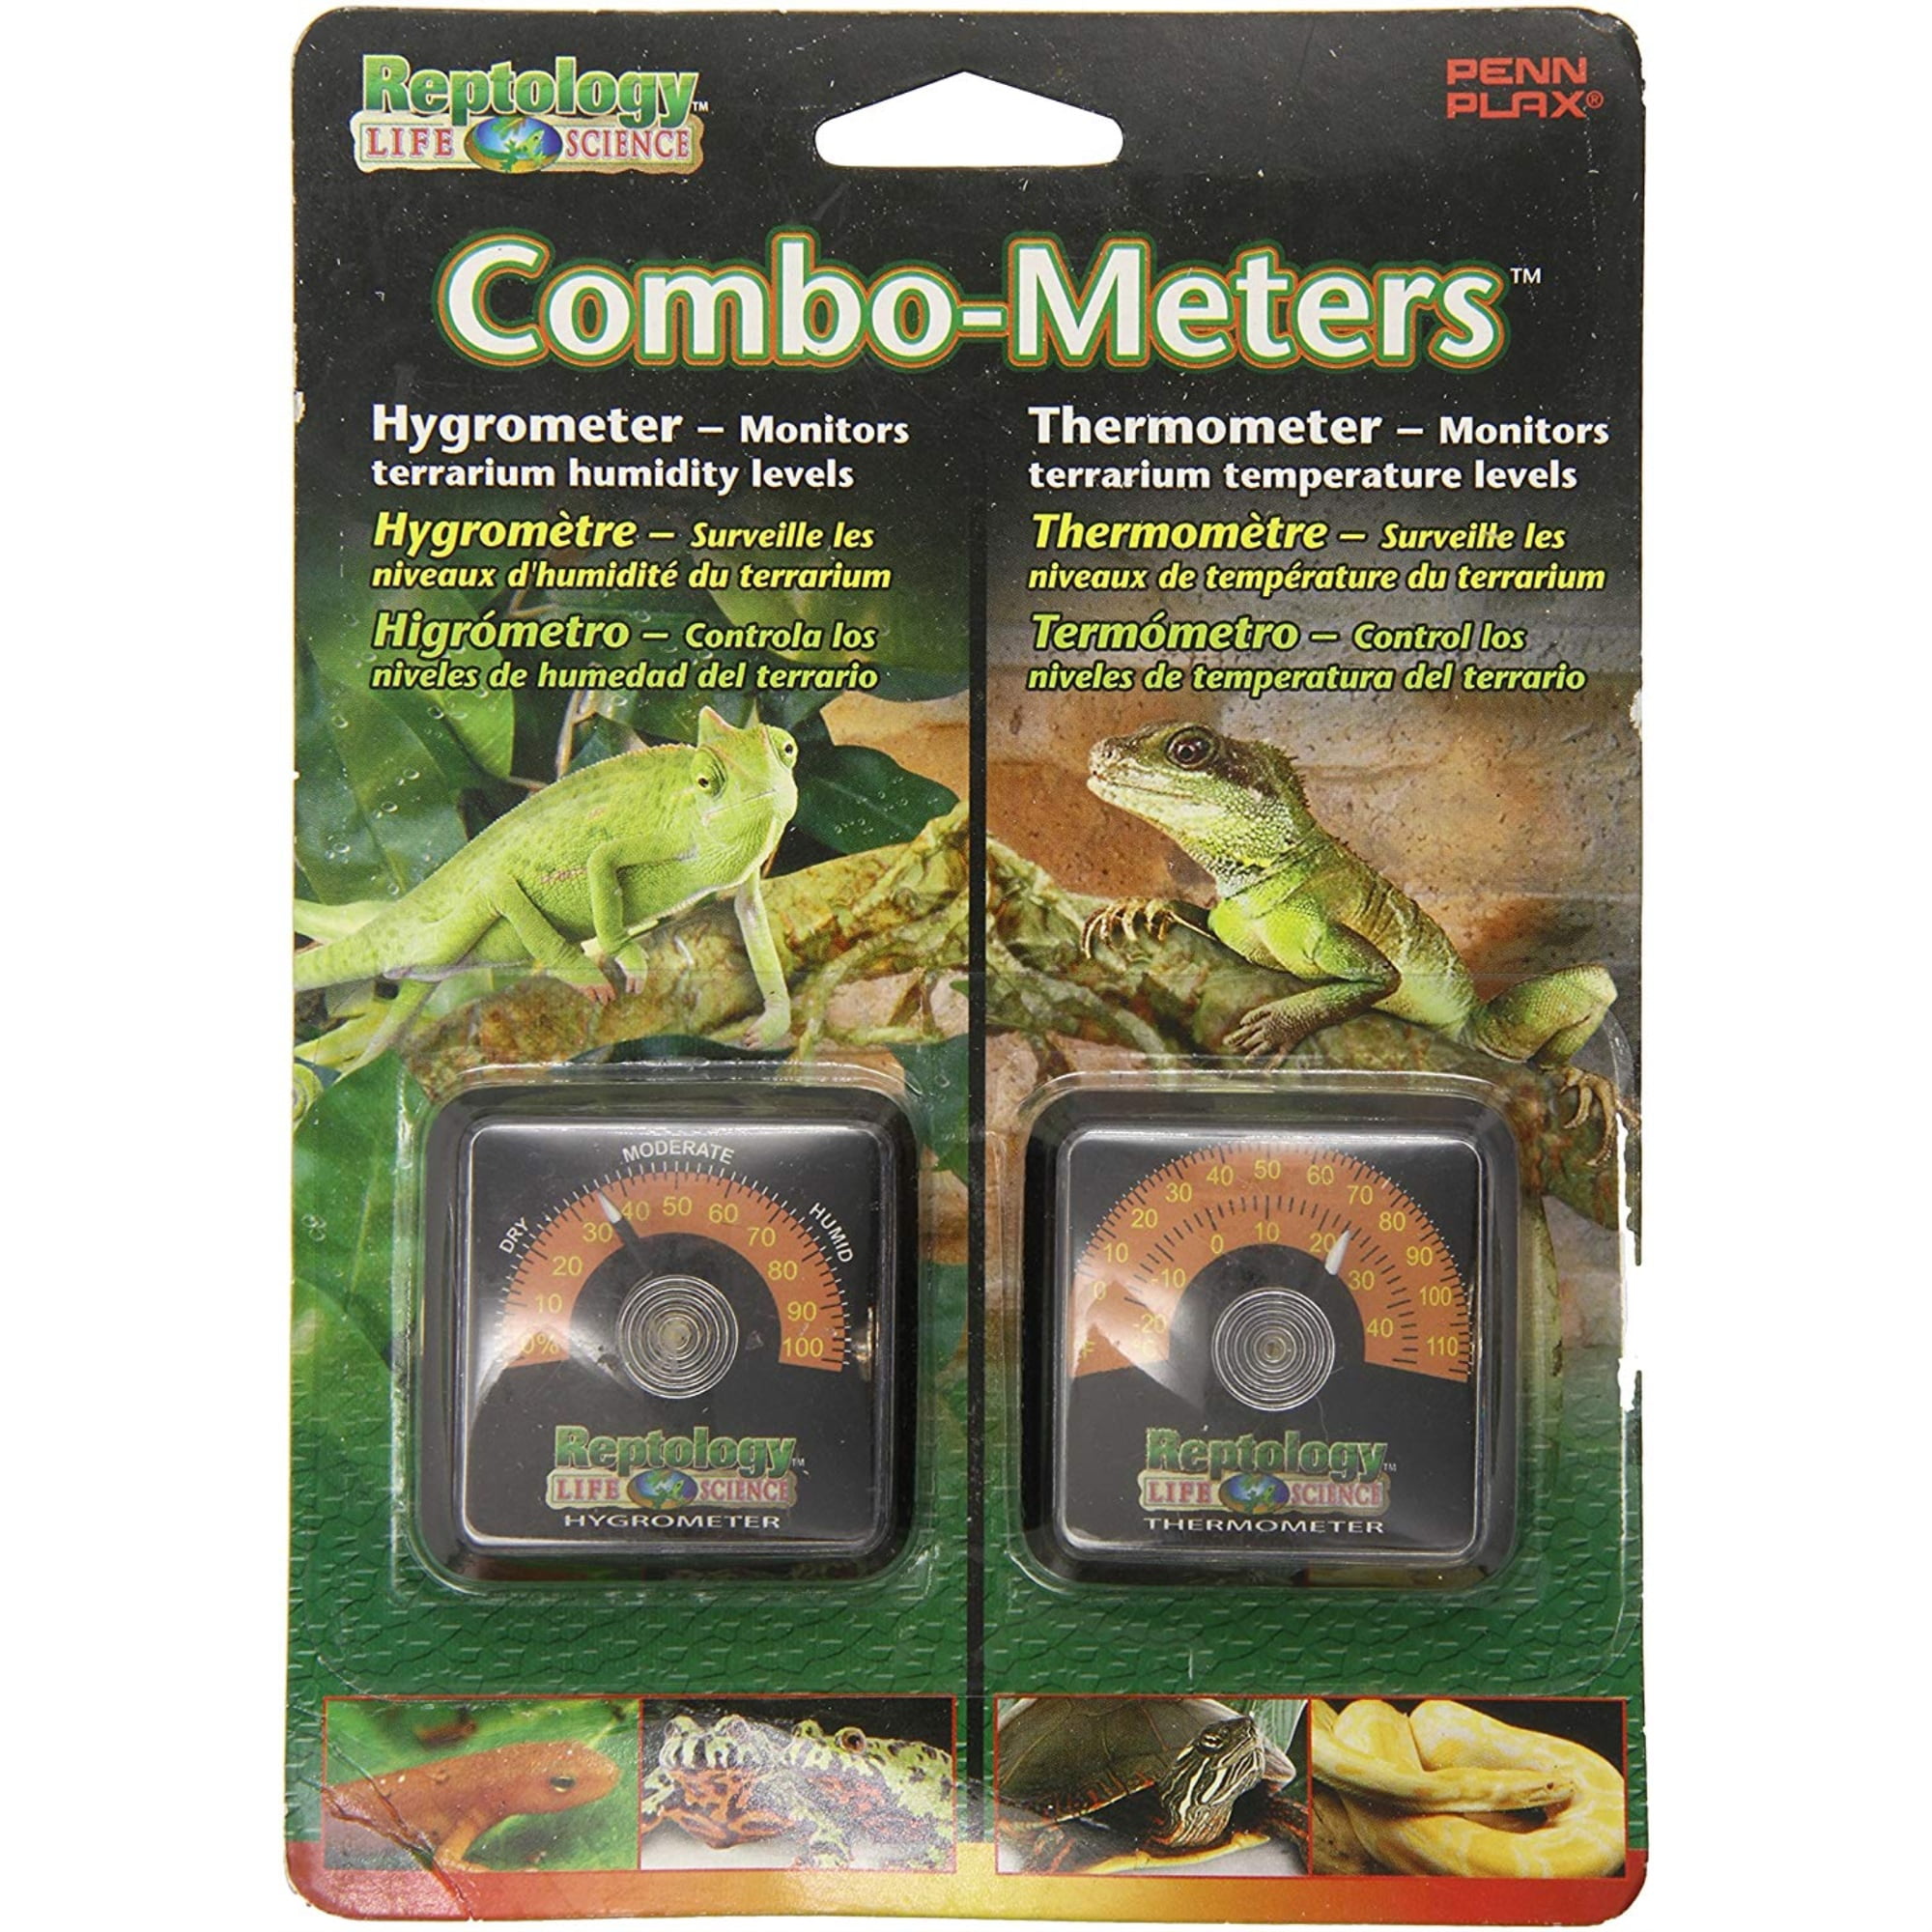 Hygrometer for Reptiles and Amphibians